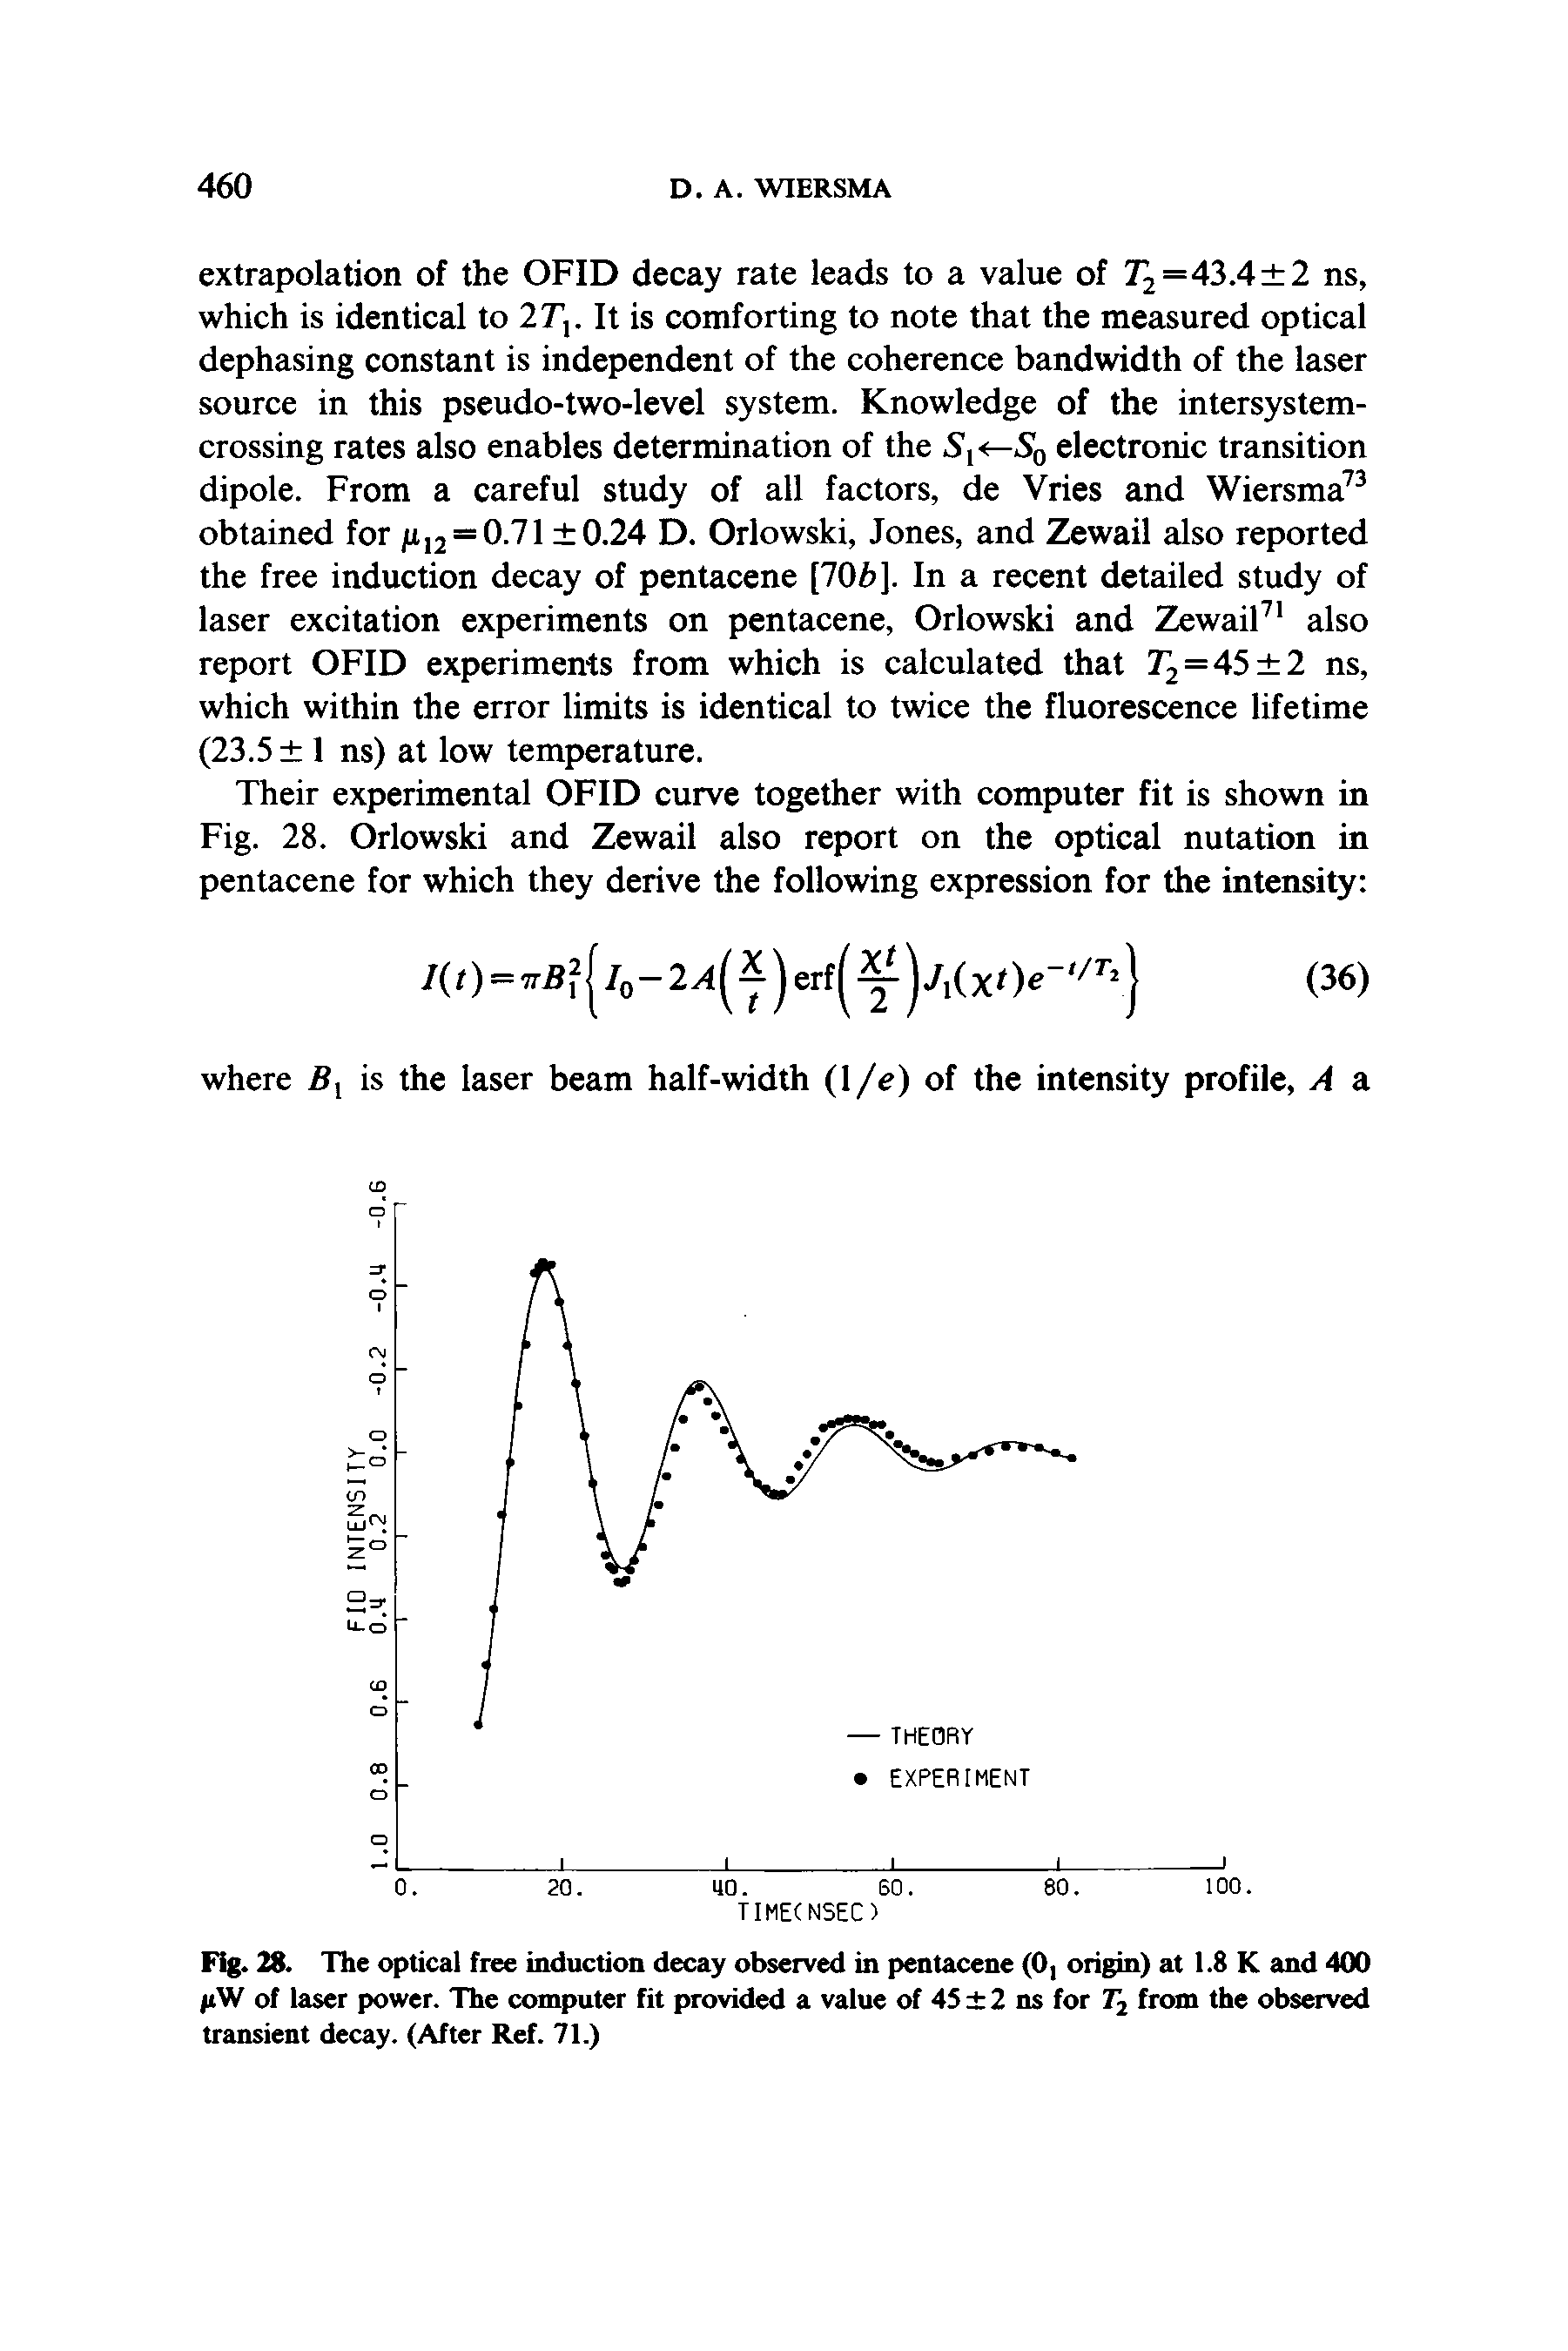 Fig. 28. The optical free induction decay observed in pentacene (0, origin) at 1.8 K and 400 pW of laser power. The computer fit provided a value of 45 2 ns for 7 from the observed transient decay. (After Ref. 71.)...